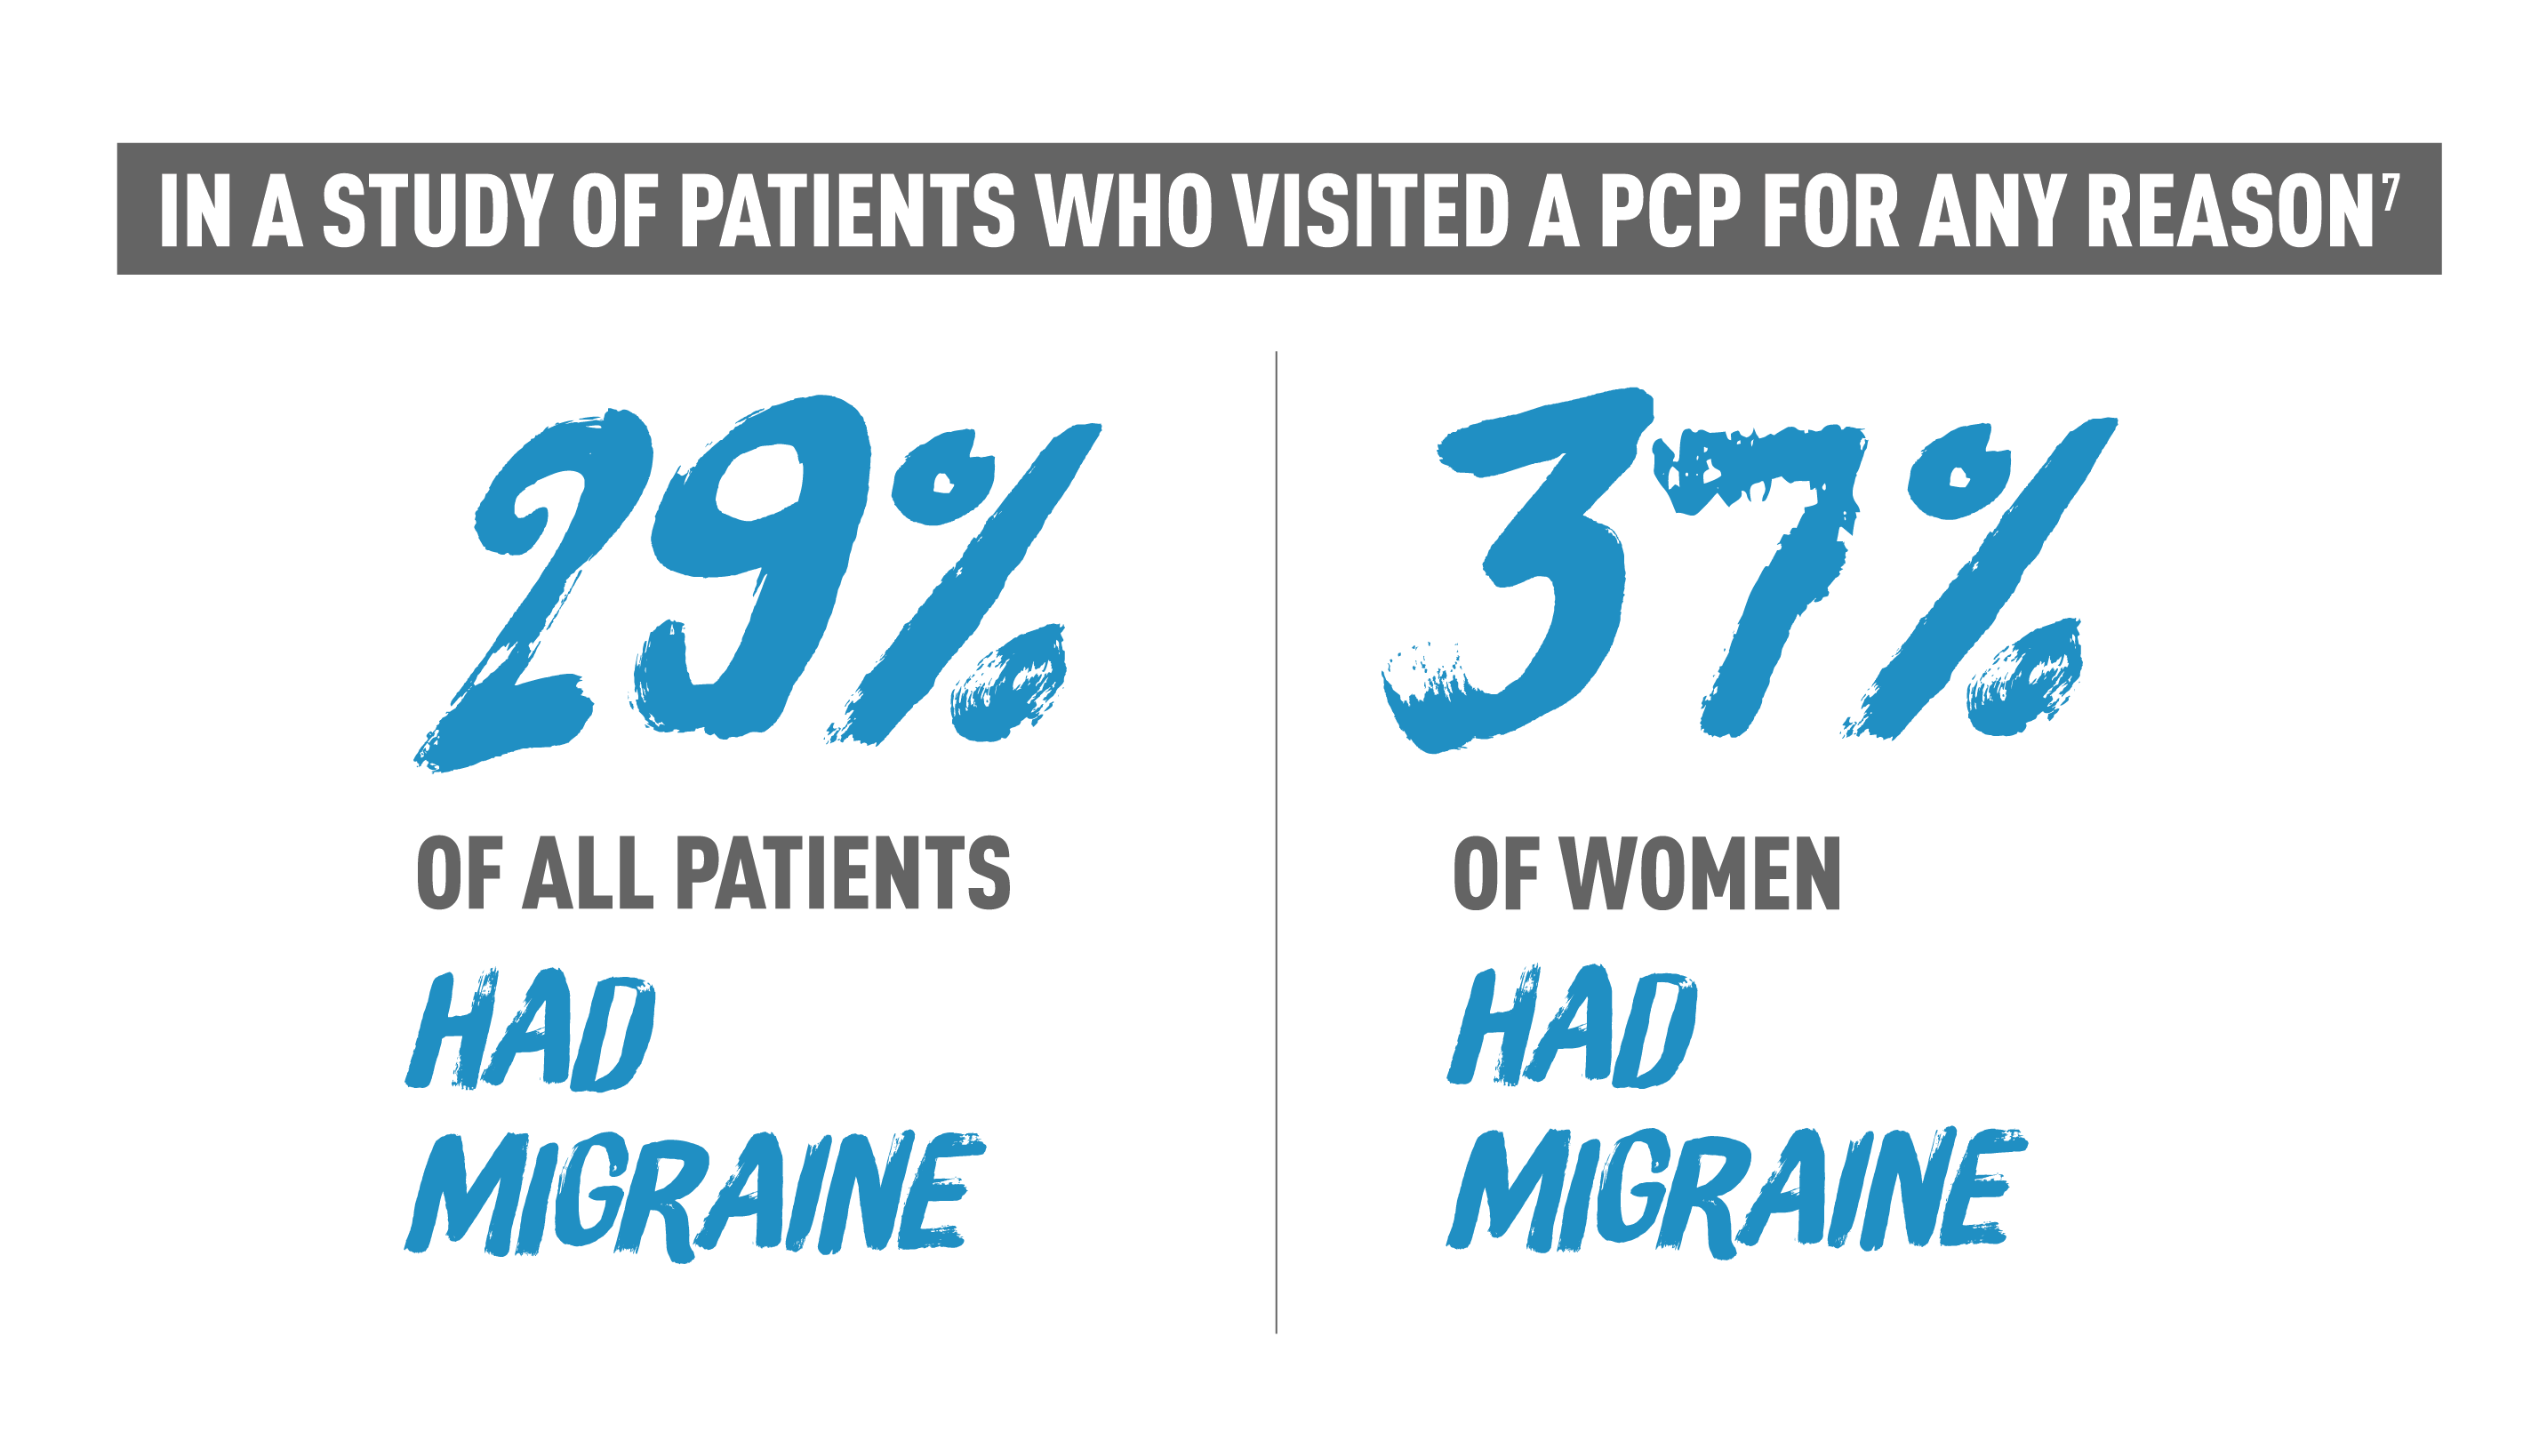 In a study of patients who visited at PCP for any reason 29% of all patients had migraine and 37% of women had migraine